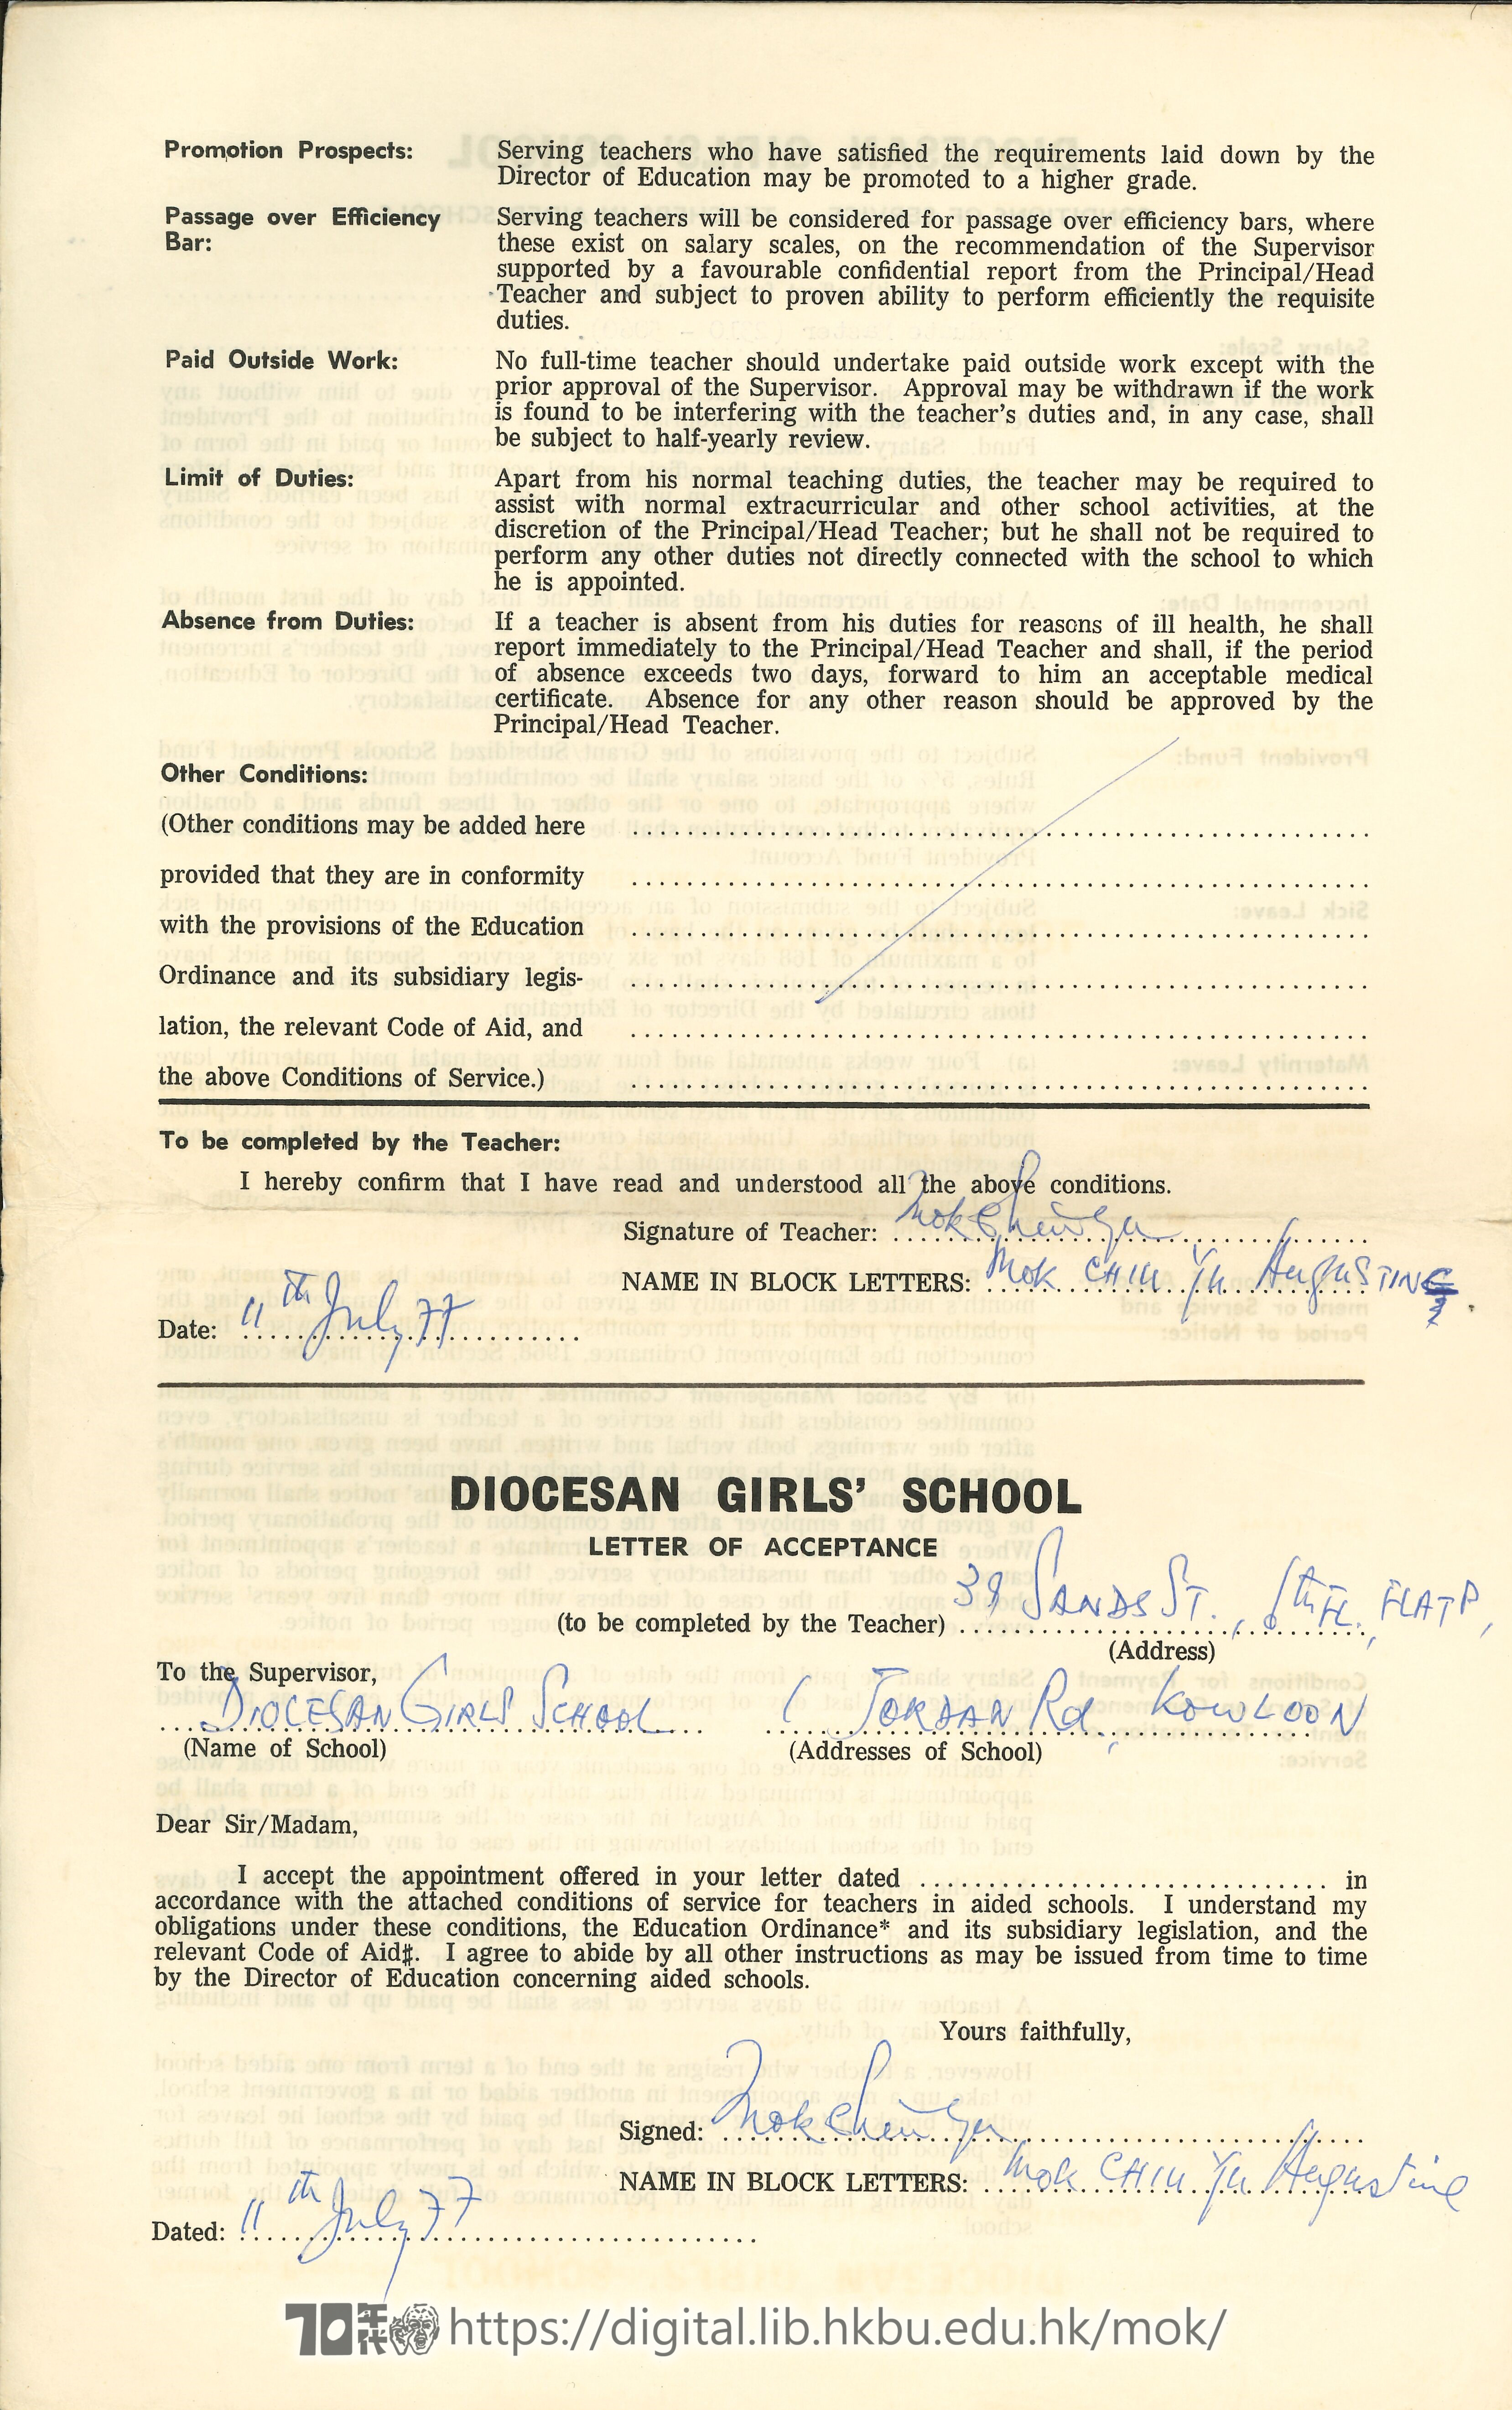   Appointment letter from Diocesam Girls